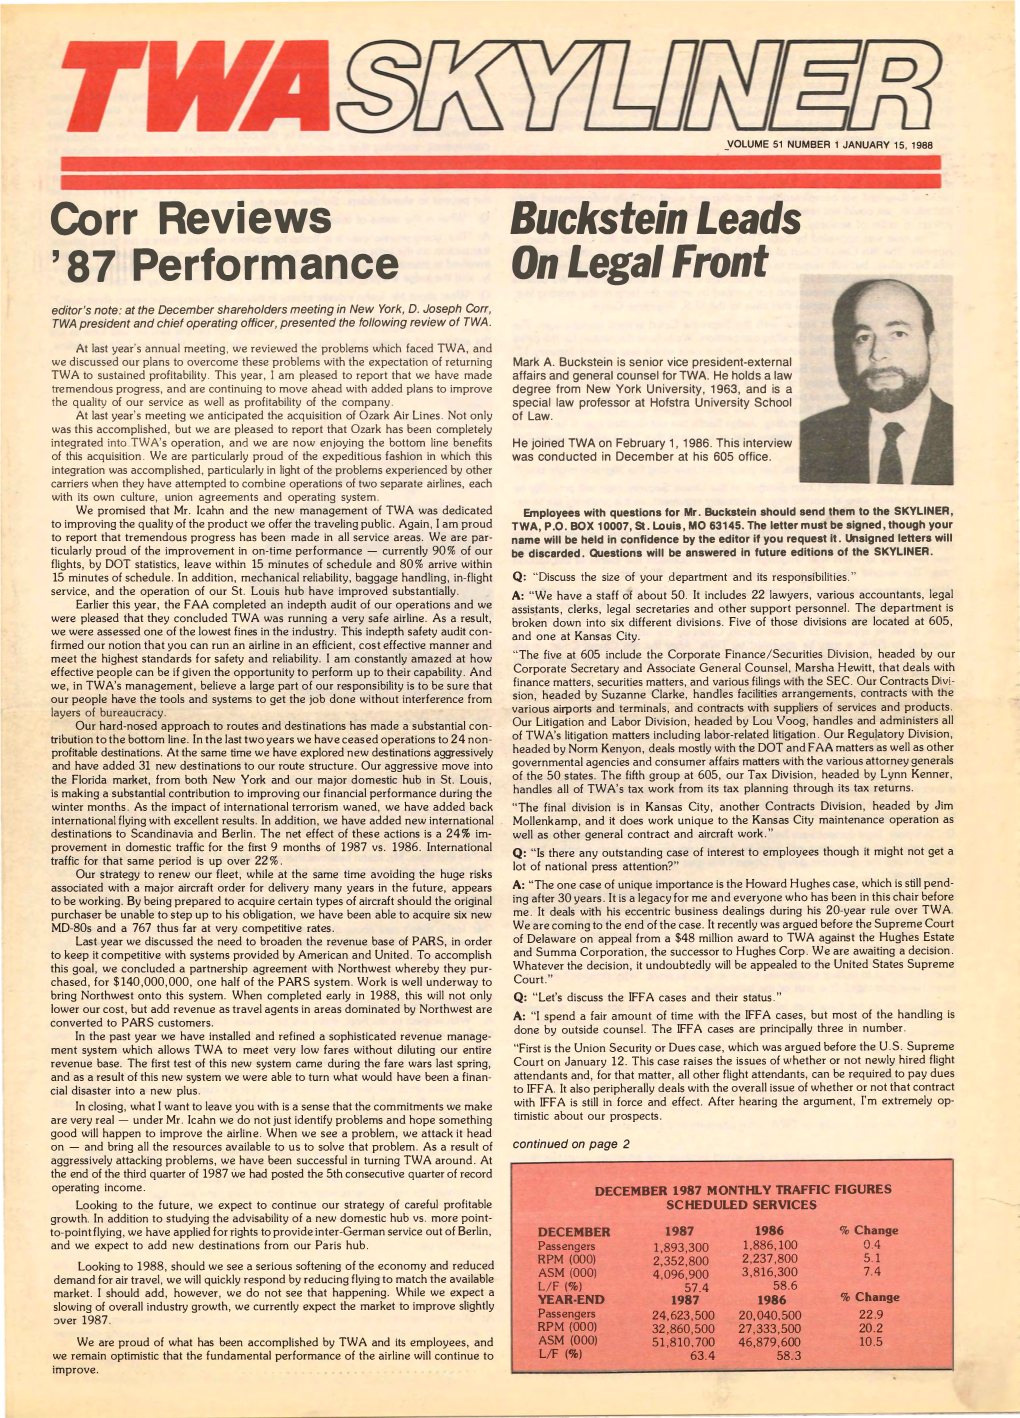 Corr Reviews Buckstein Leads '87 Performance on Legal Front Editor's Note: at the December Shareholders Meeting in New York, D